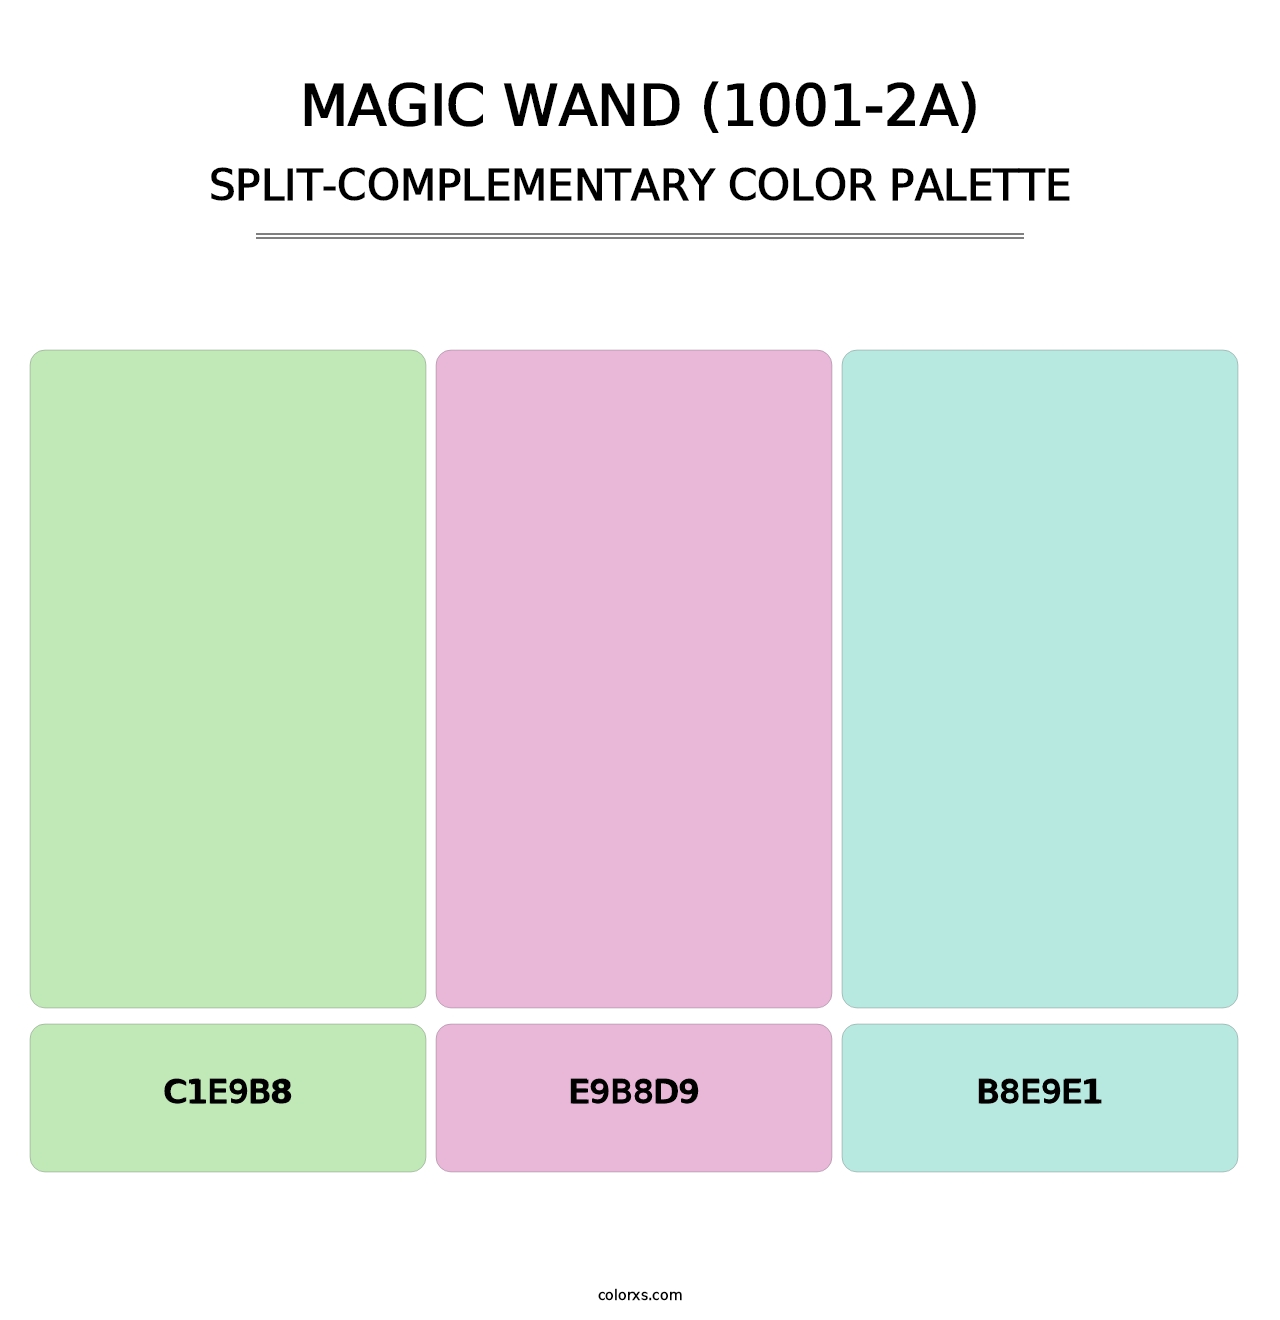 Magic Wand (1001-2A) - Split-Complementary Color Palette